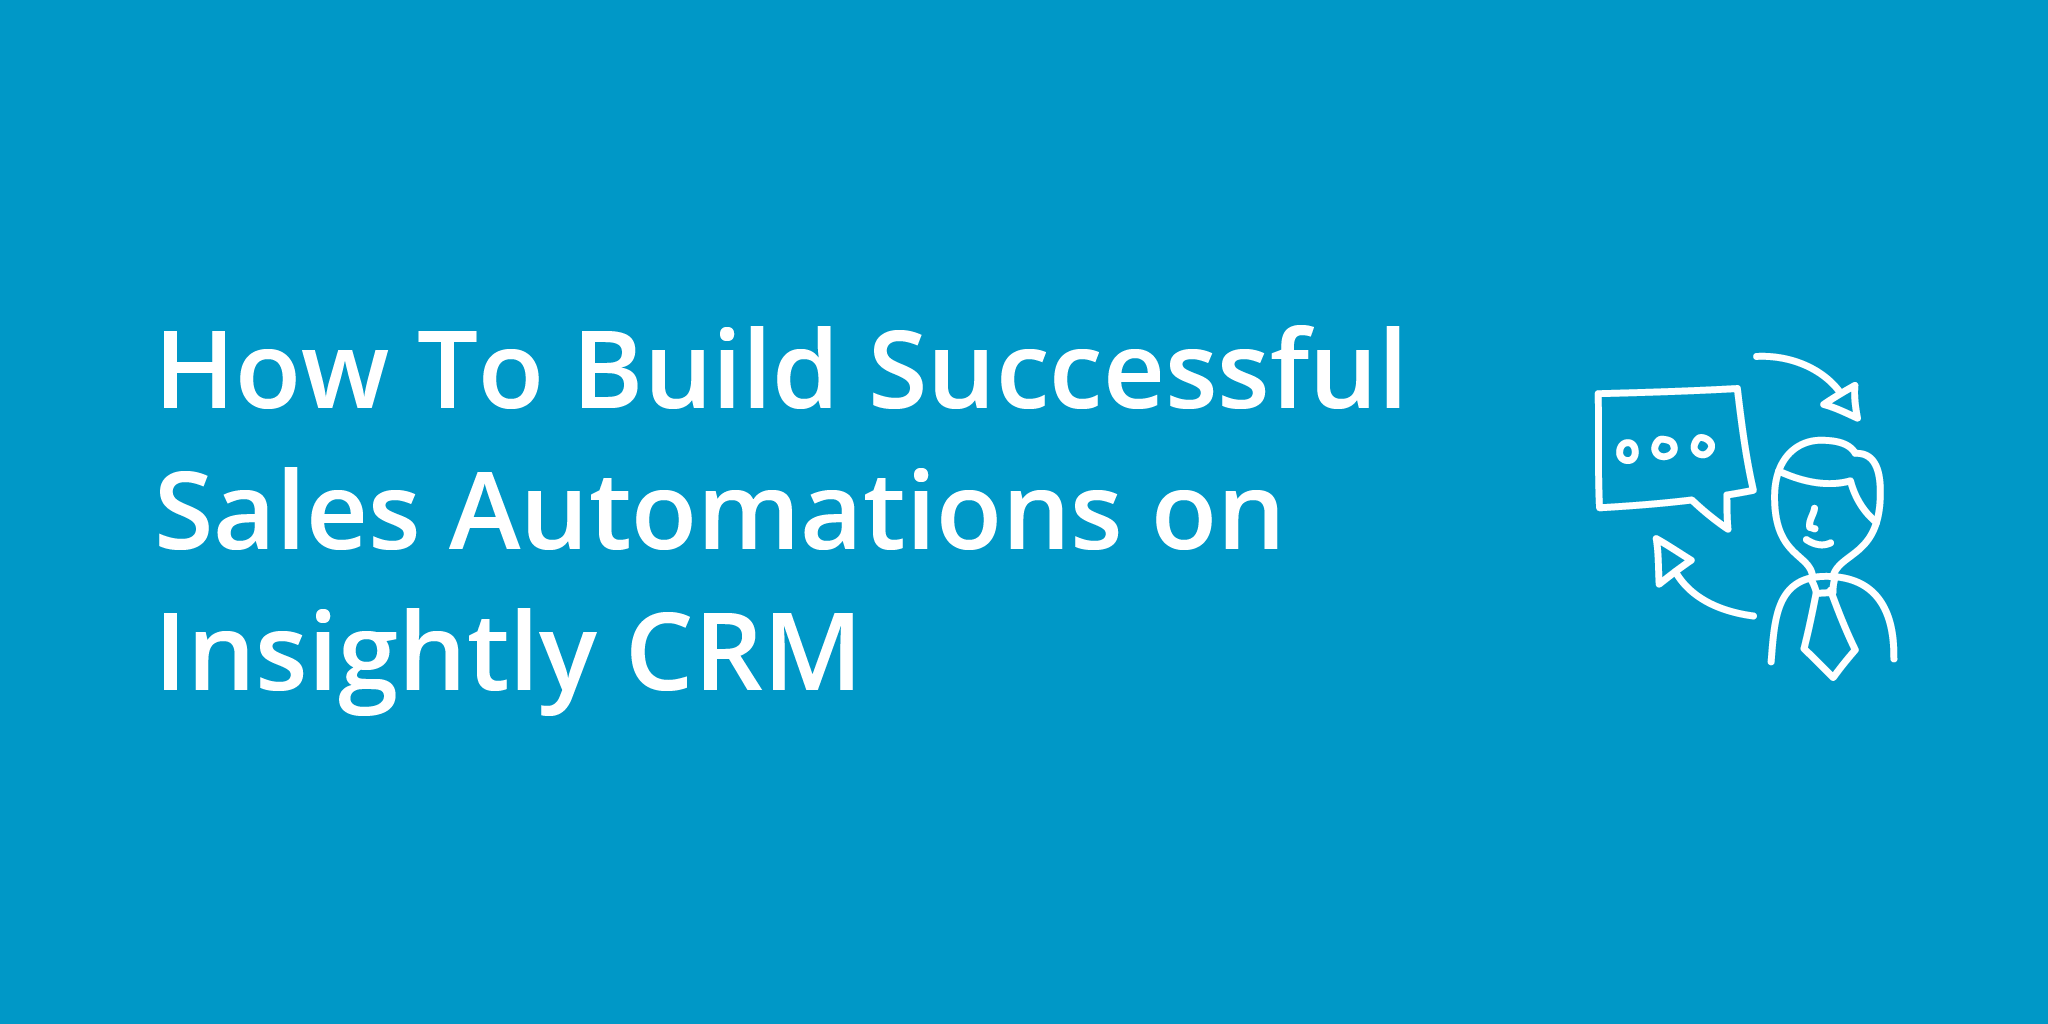 How To Build Successful Sales Automations on Insightly CRM | Telephones for business